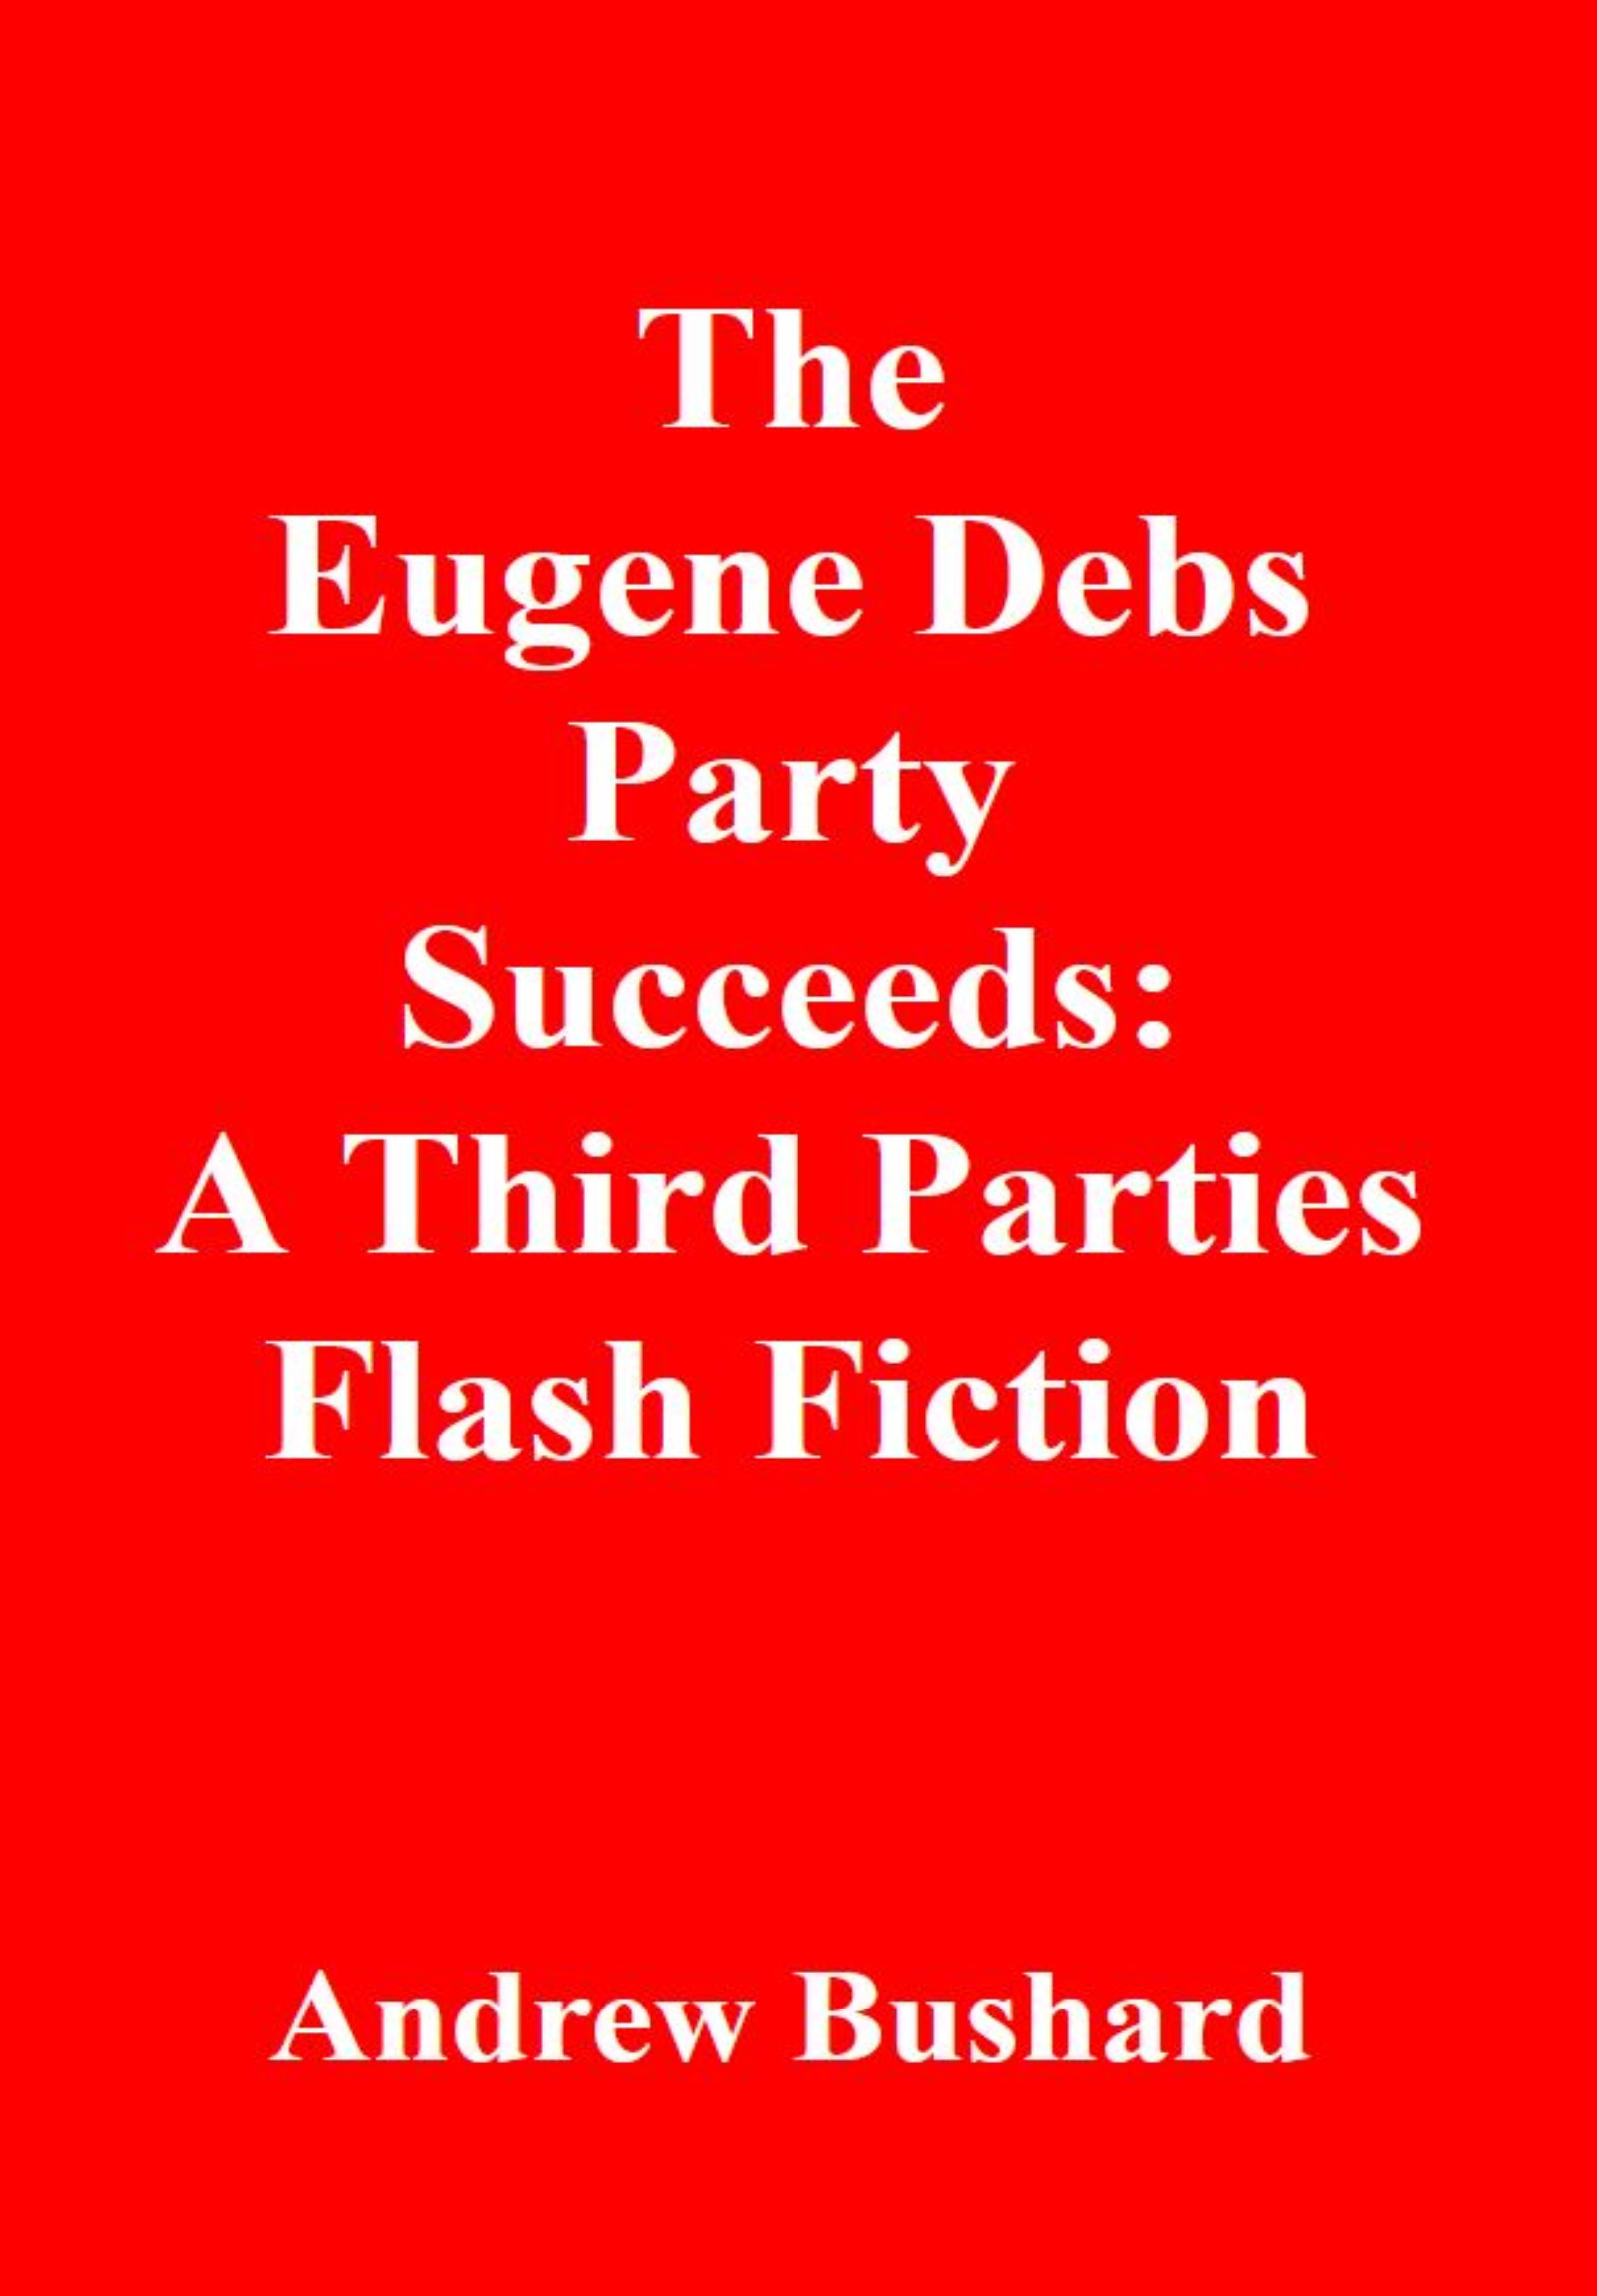 The Eugene Debs Party Succeeds: A Third Parties Flash Fiction's featured image